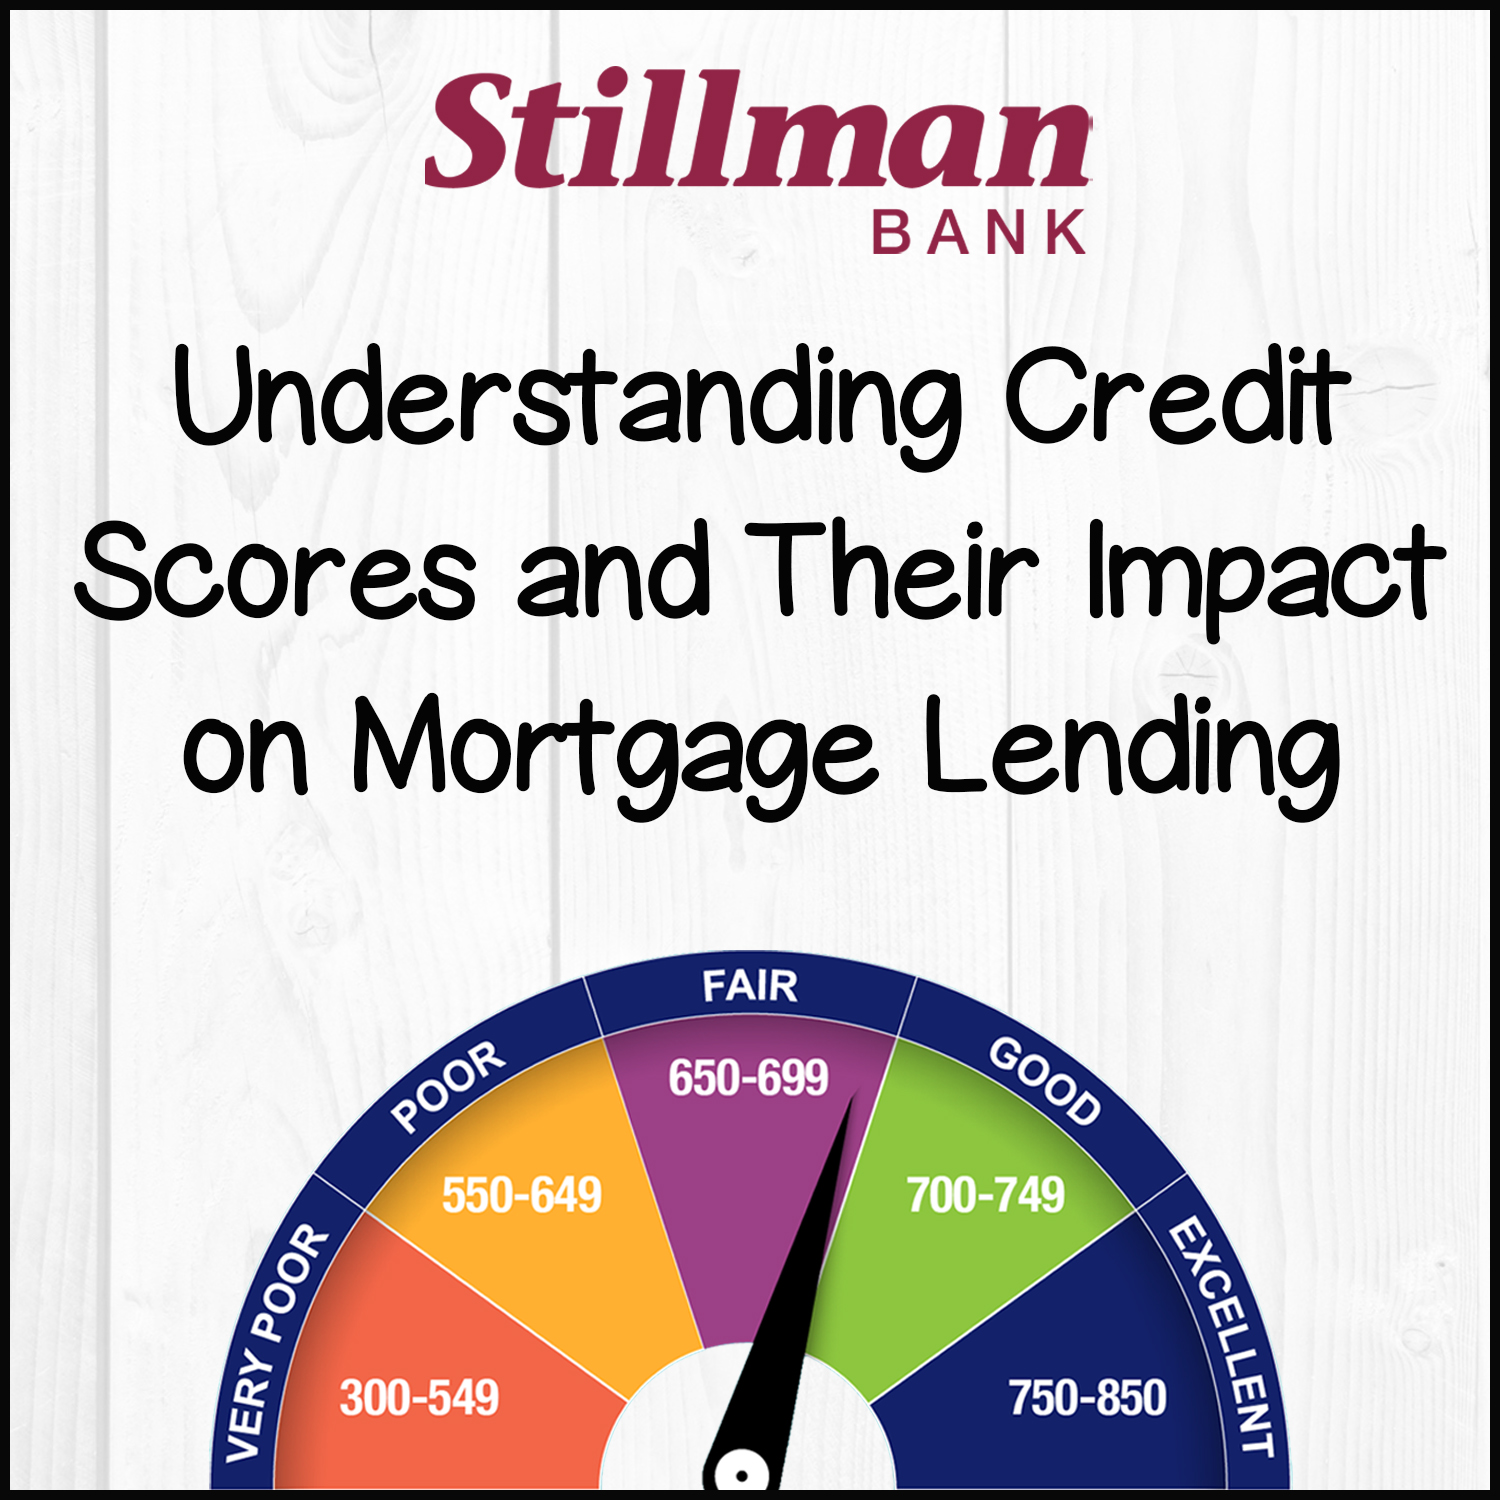 understanding-credit-scores-and-their-impact-on-mortgage-lending-stillman-bank